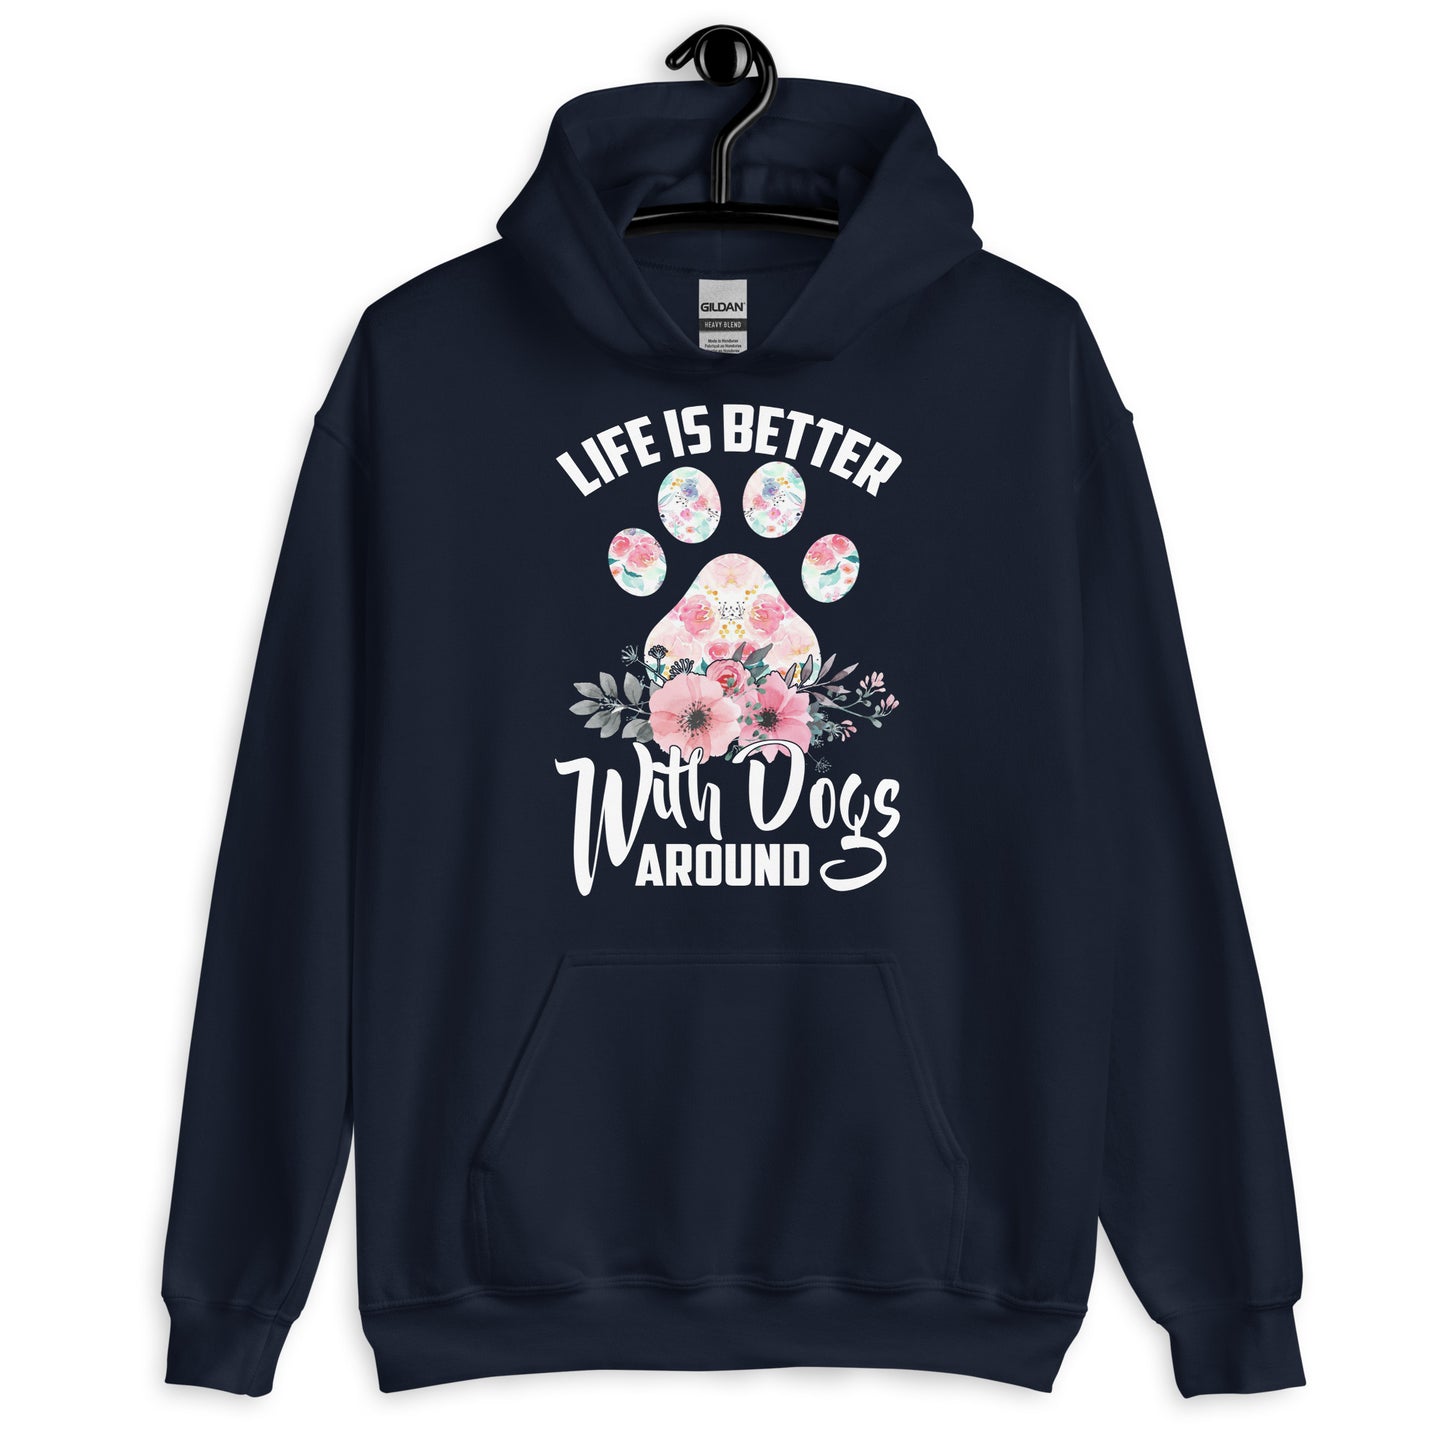 Life is Better with Dogs Around Hoodie